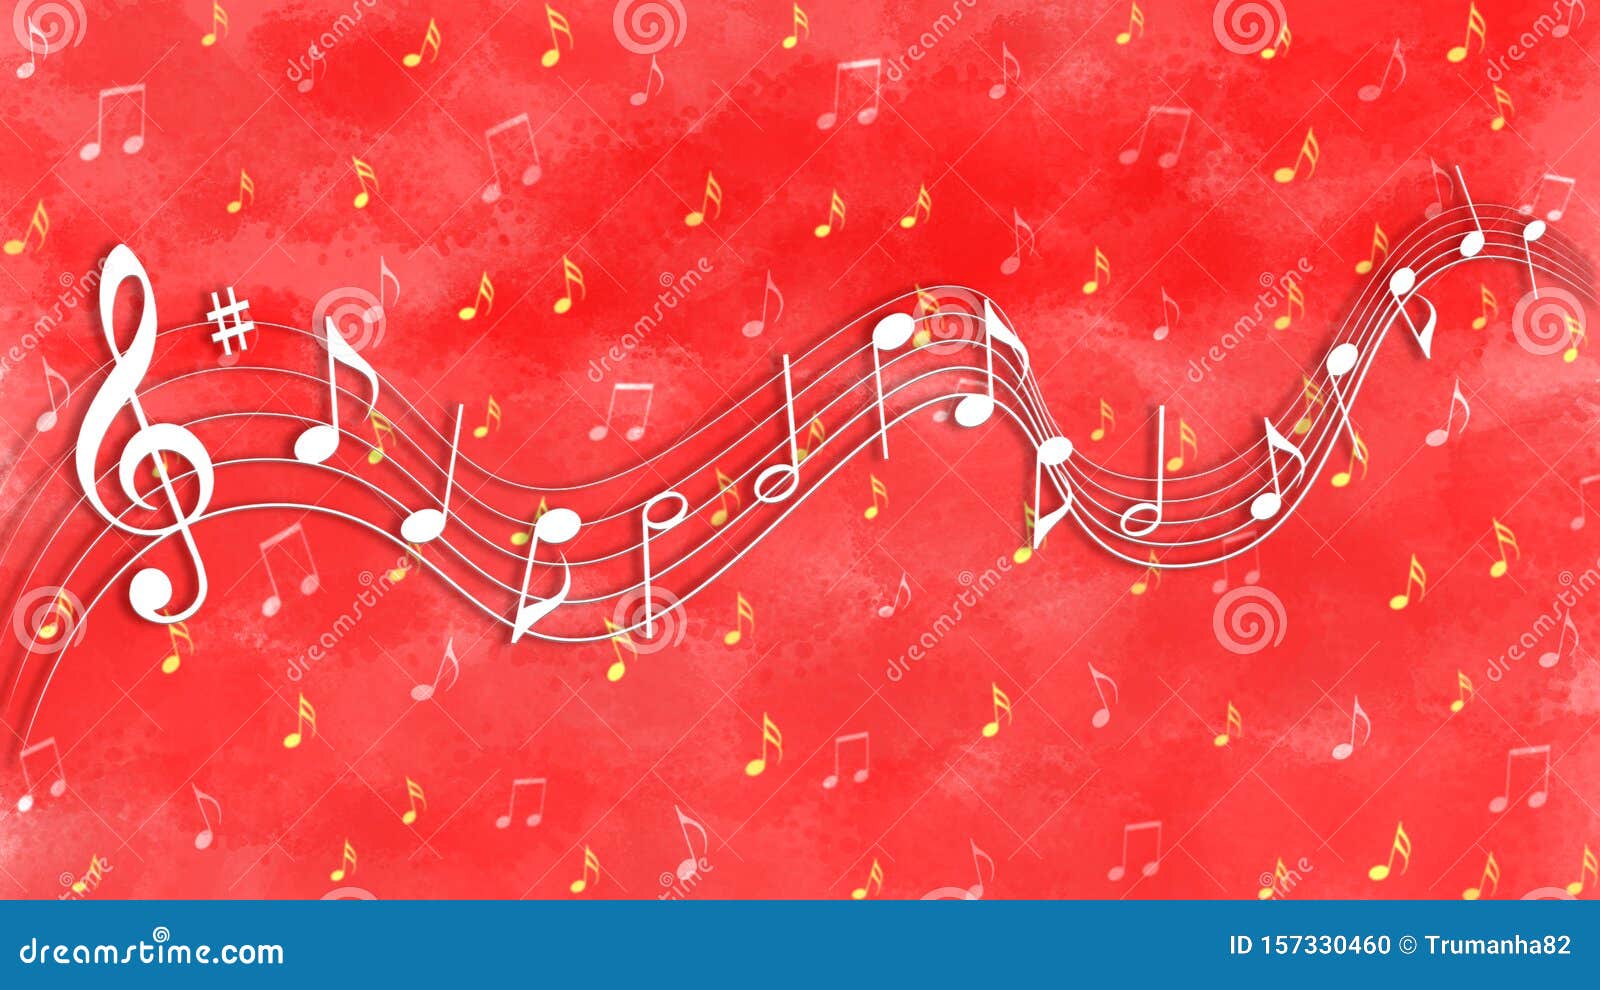 Music Notes in Red Background Stock Illustration - Illustration of blur,  classic: 157330460